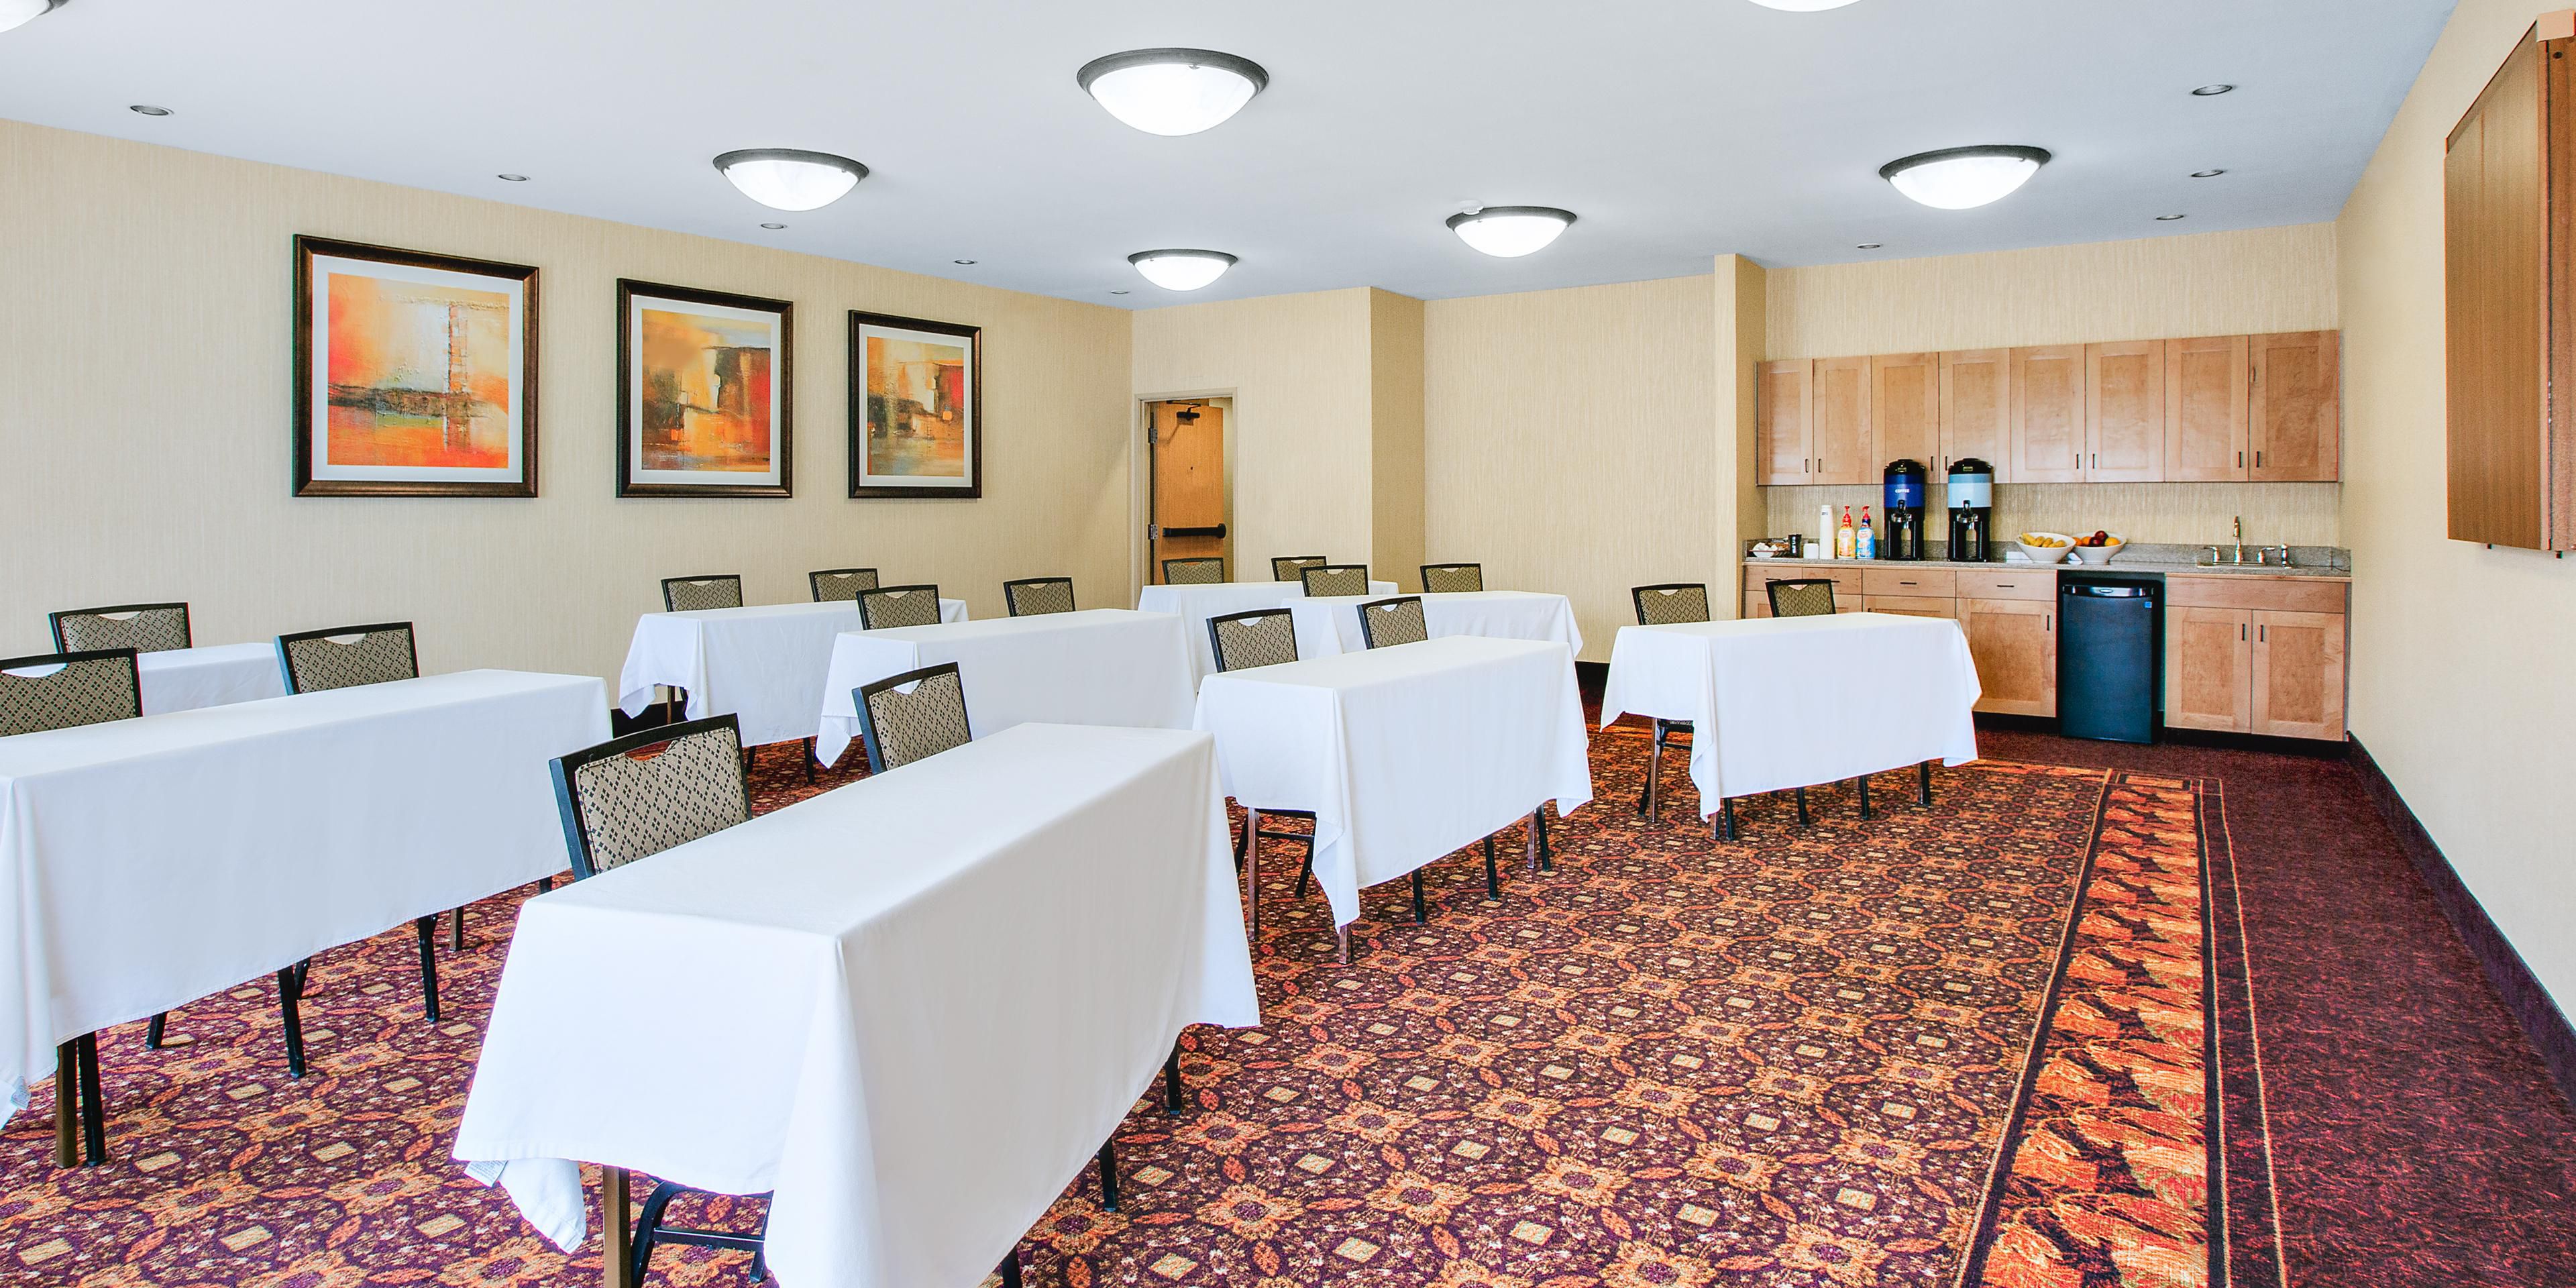 At the Holiday Inn Express, we offer our 900 square foot Meeting Room. We can fit up to 35 people, and will set up the room however you want it! Our room rental fee includes coffee, water, overhead projector, screen, flipcharts, and a podium. We also have breakfast, and additional refreshment options available. We can't wait to host your meeting!